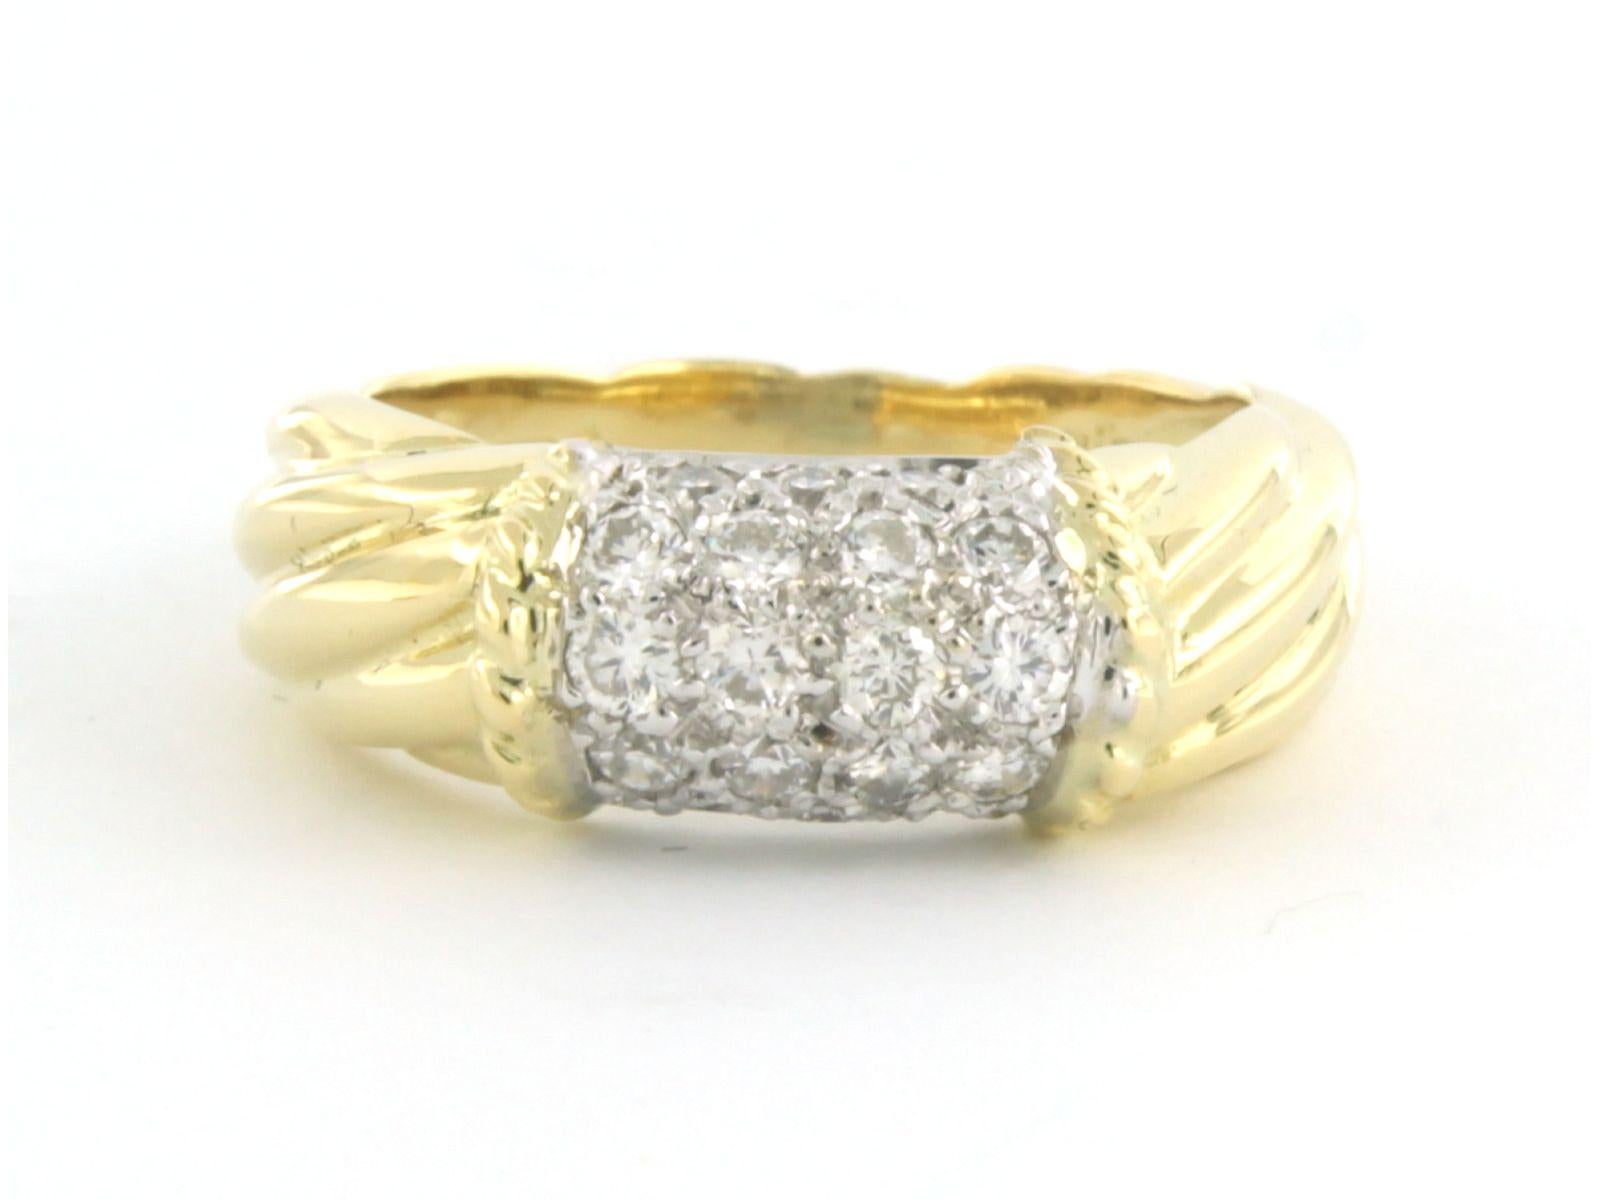 18k bicolour gold ring set with brilliant cut diamonds up to . 0.40ct - F/G - VS/SI - ring size U.S. 4.5 - EU. 15.25 (48)

detailed description

the top of the ring is 0.7 cm wide

Ring size US 4.5 - EU. 15.25 (48), the ring can be enlarged or